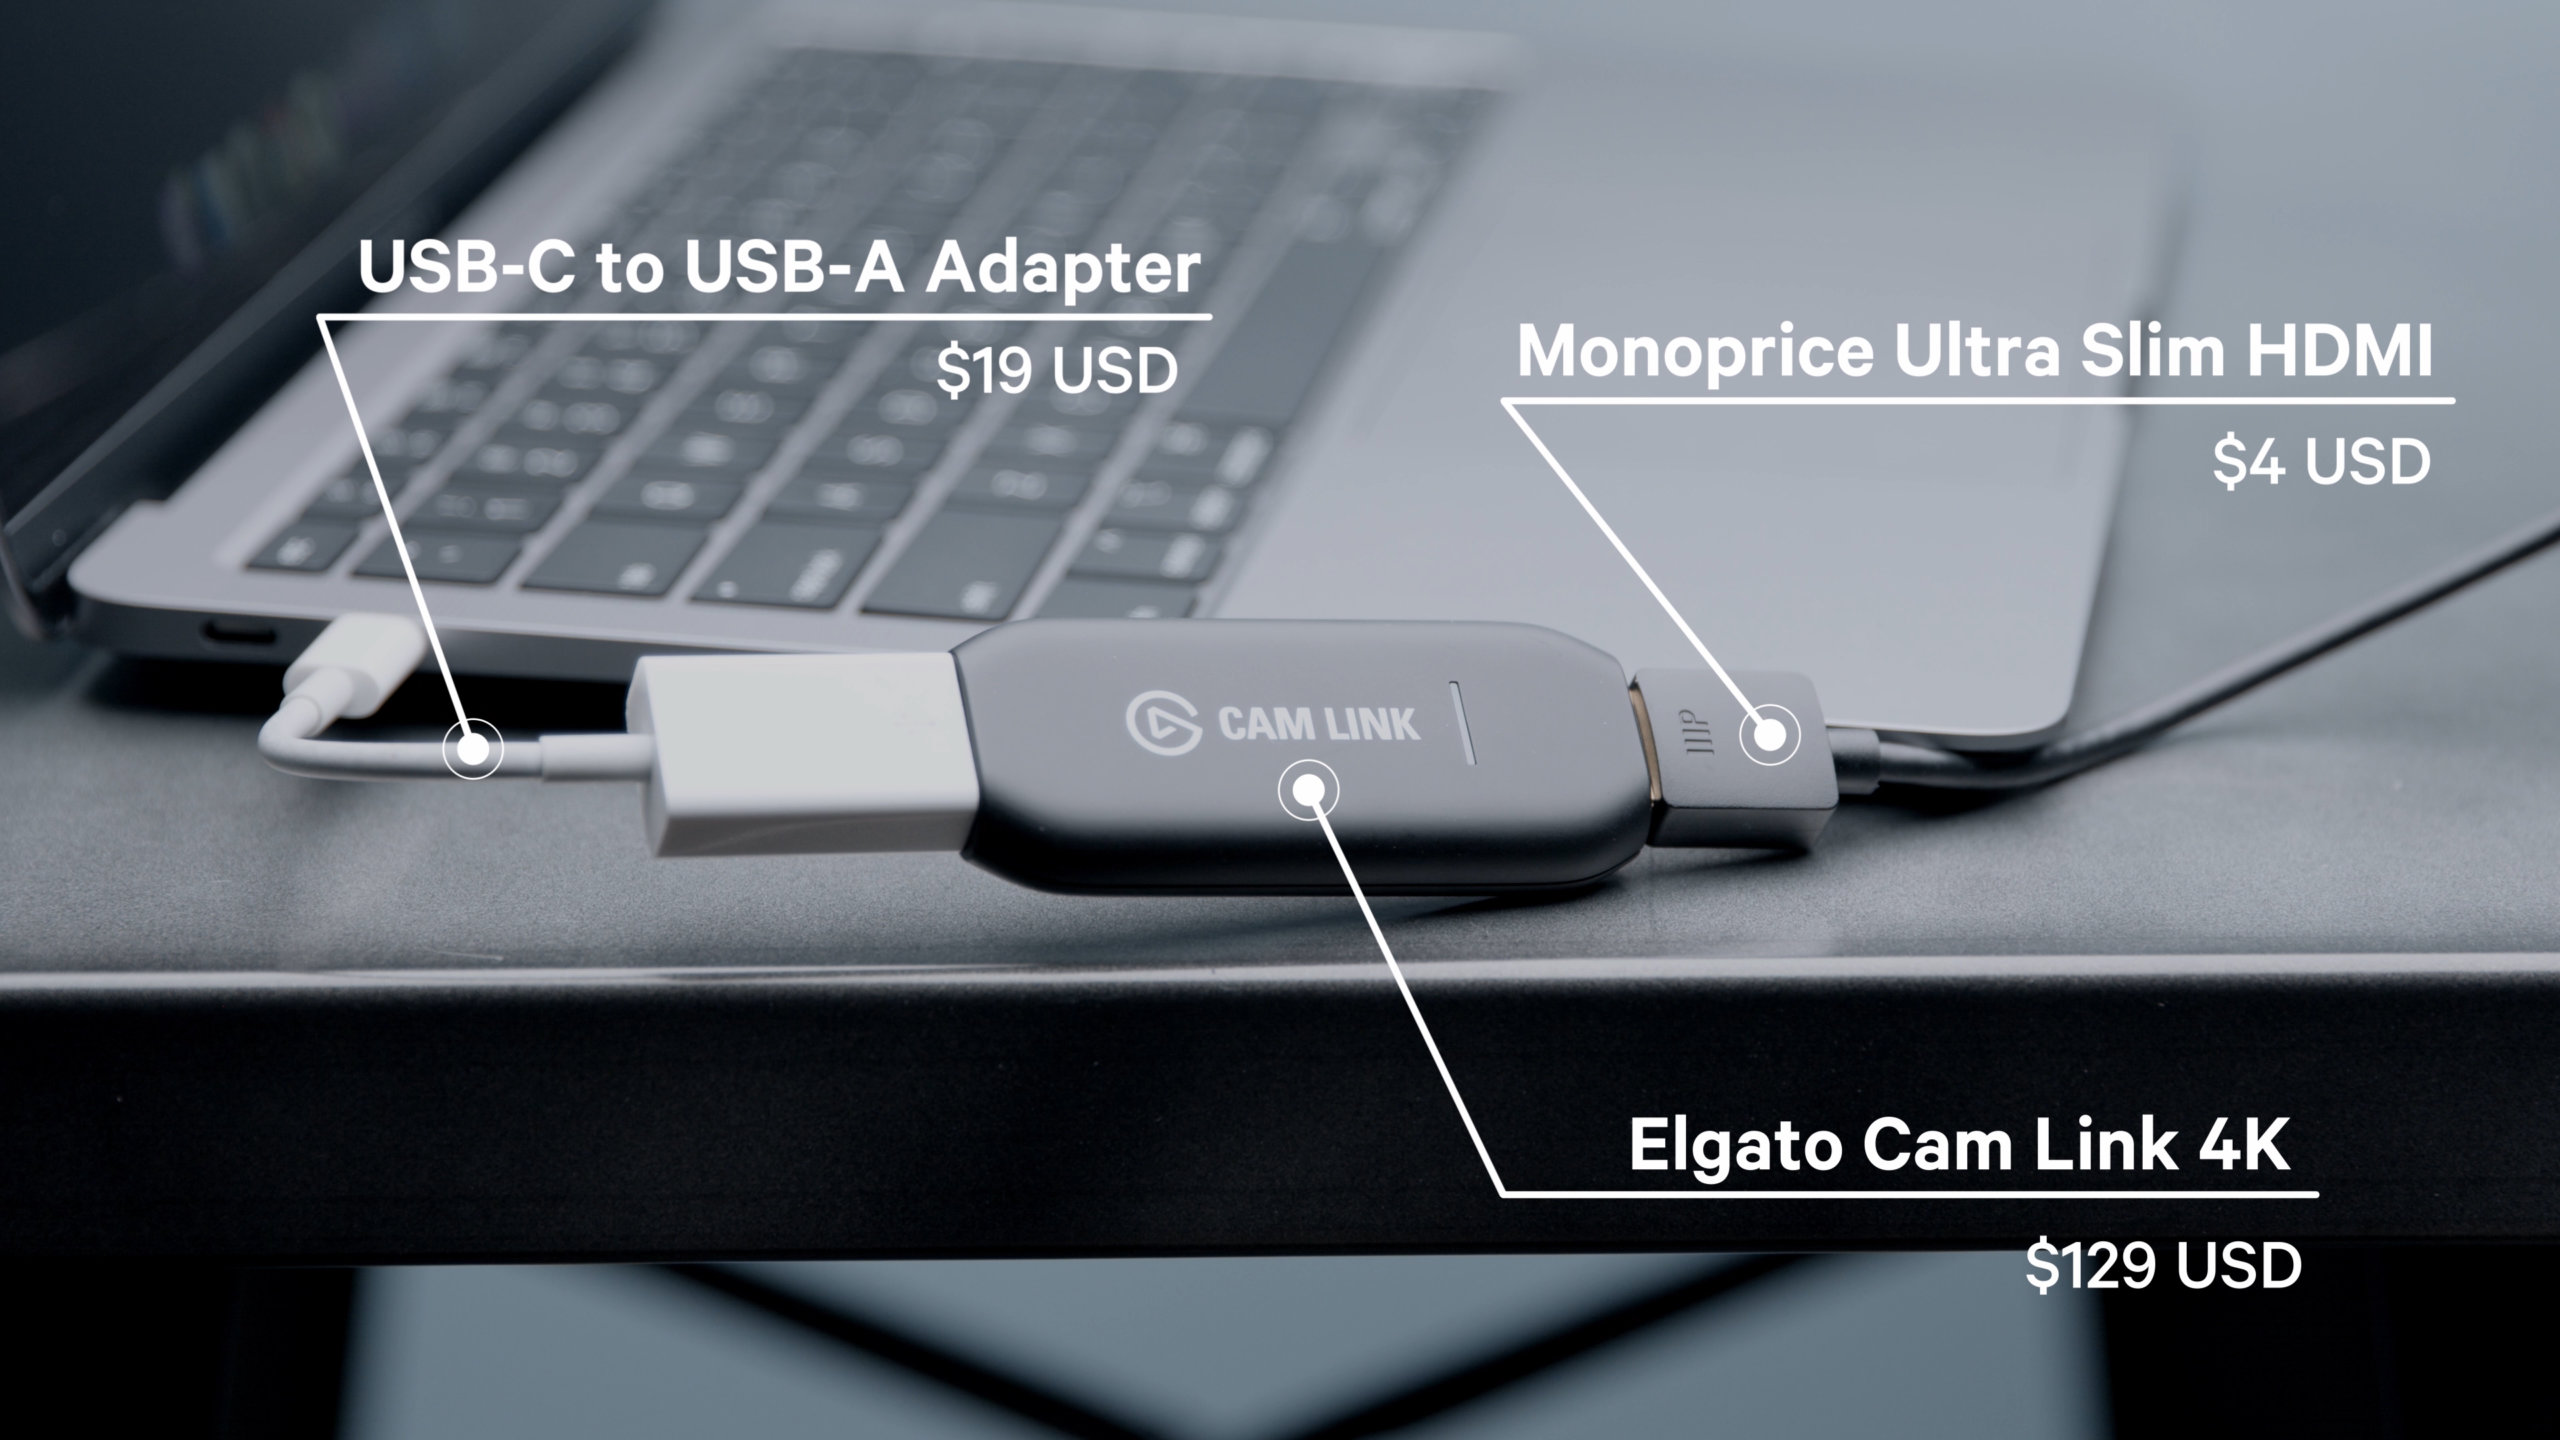 The Elgato Cam Link 4K is a capture device that plugs directly into your computer's USB port